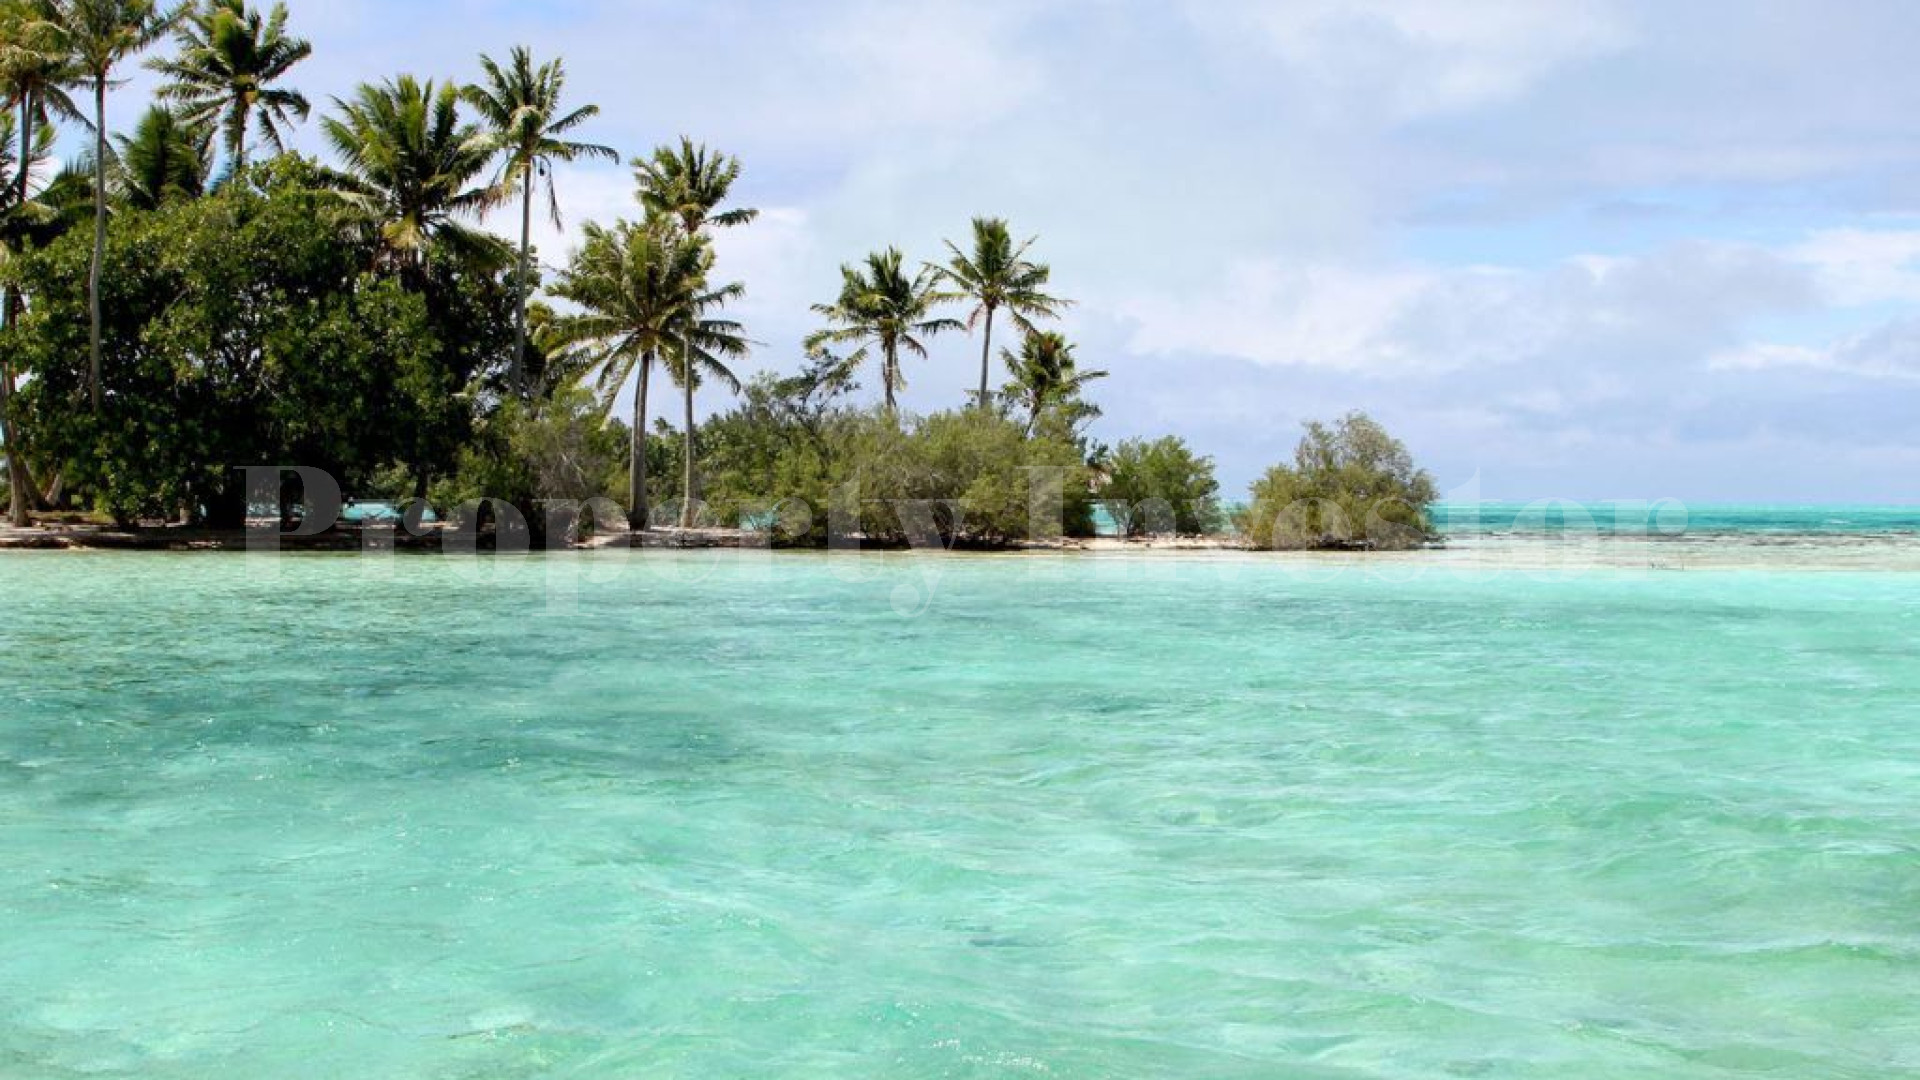 Magnificent 7.12 Hectare Private Virgin Island for Sale in French Polynesia